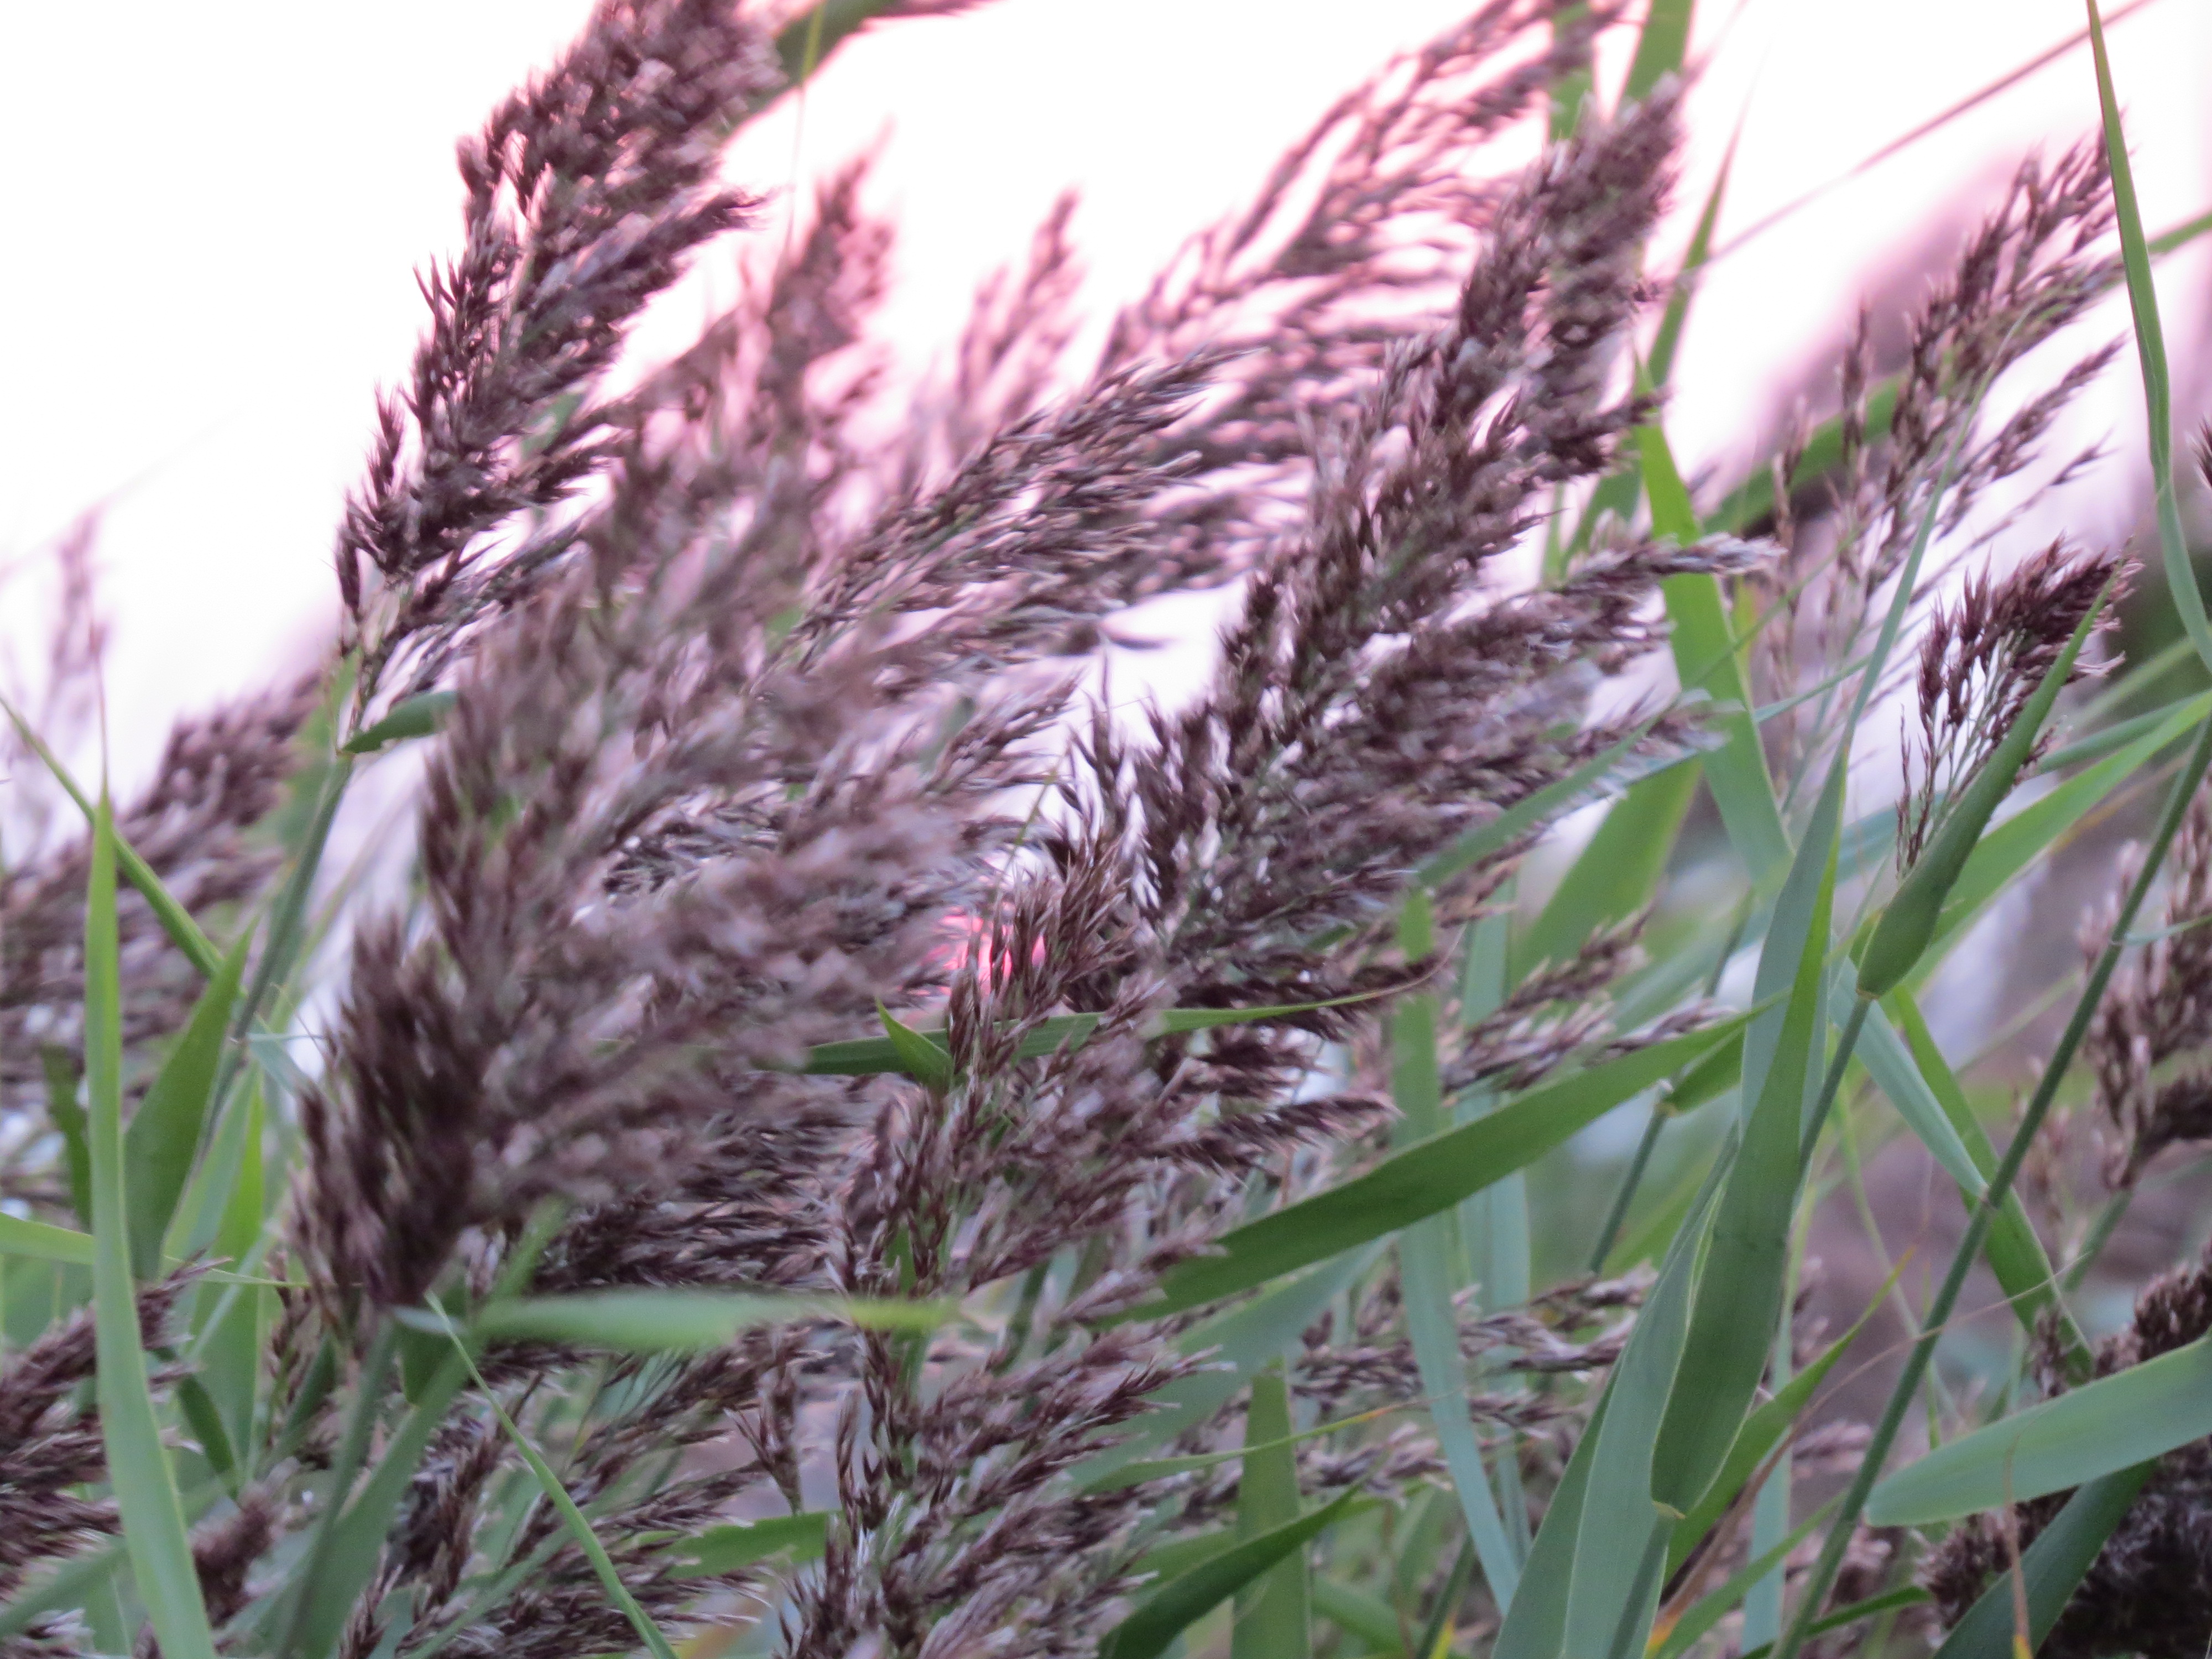 Grass grains with sunset behind